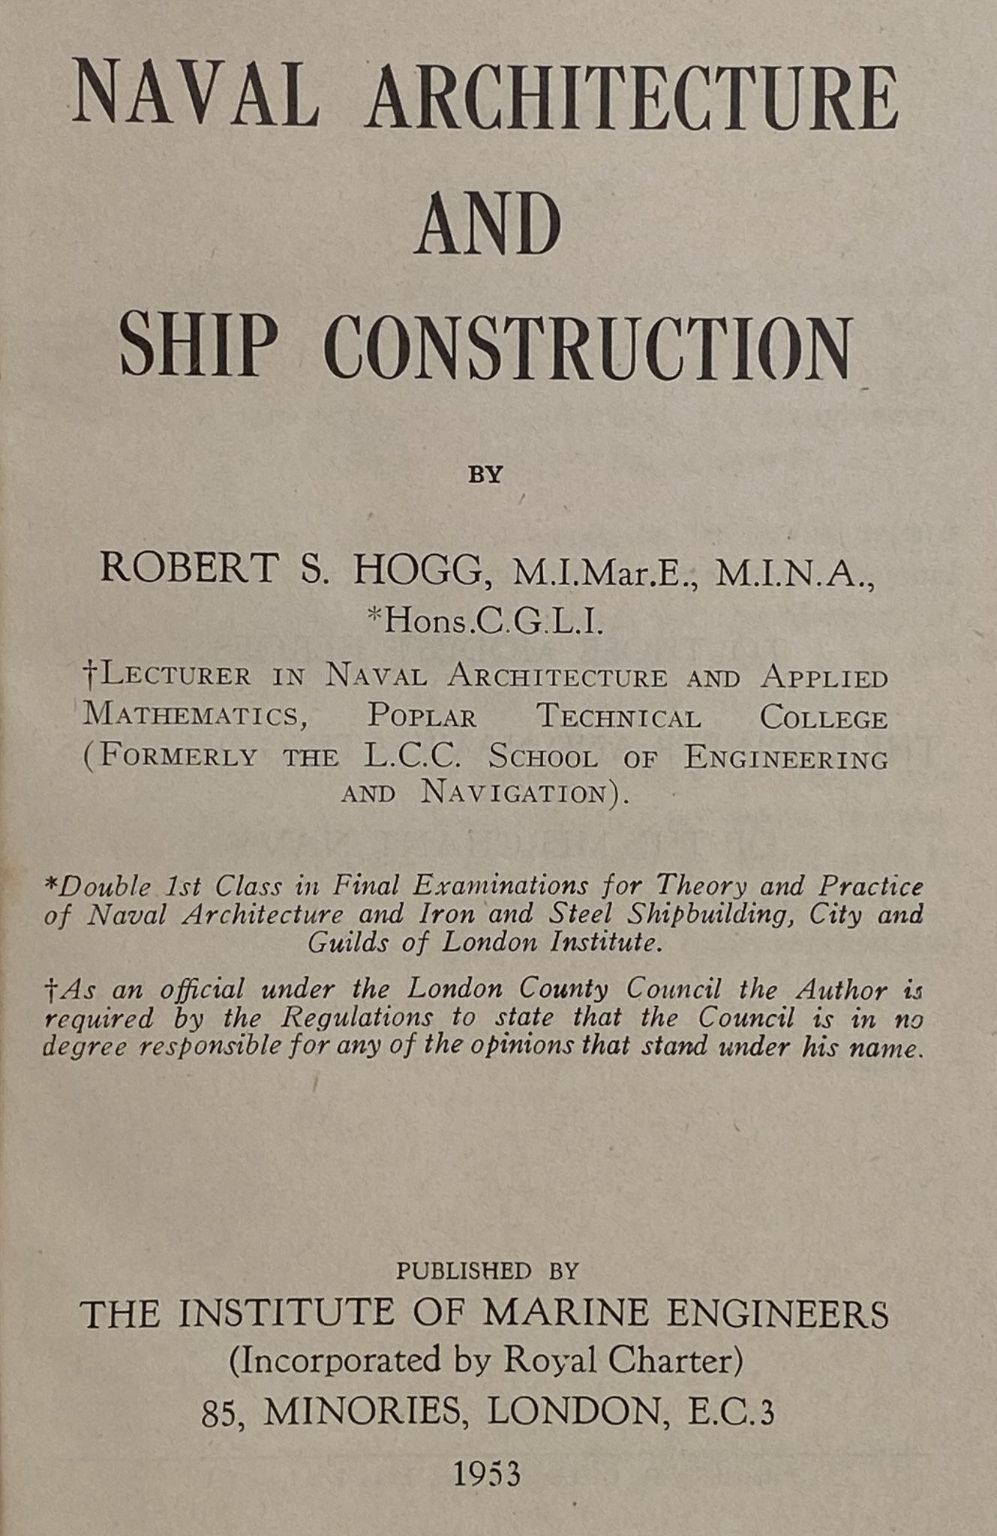 NAVAL ARCHITECTURE AND SHIP CONSTRUCTION